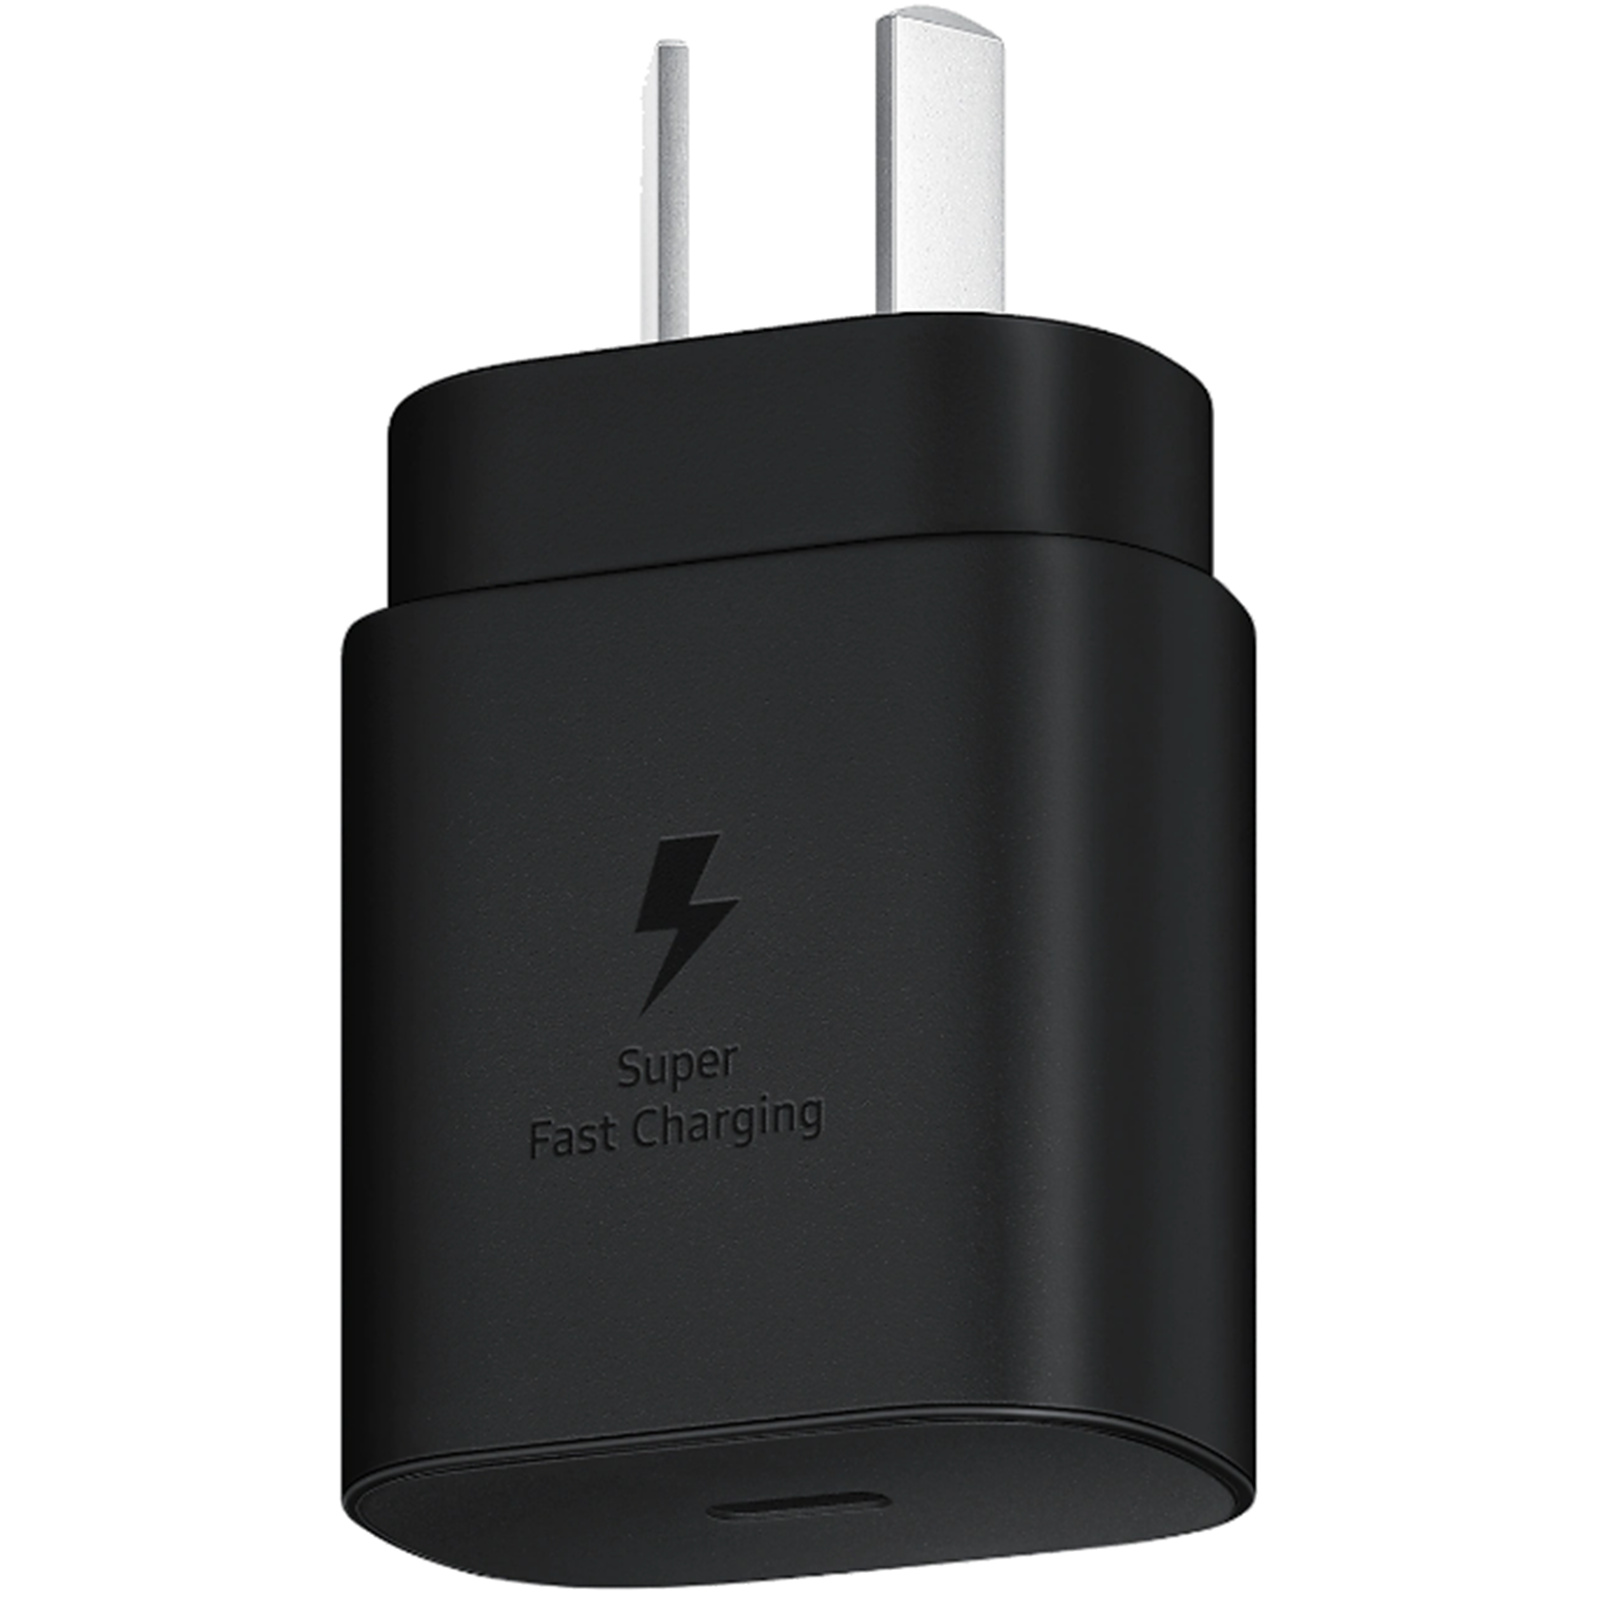 Buy the Samsung 25W USB-C PD Fast Charging Wall Charger - Black, Super Fast...  ( EP-TA800NBEGAU ) online - PBTech.com